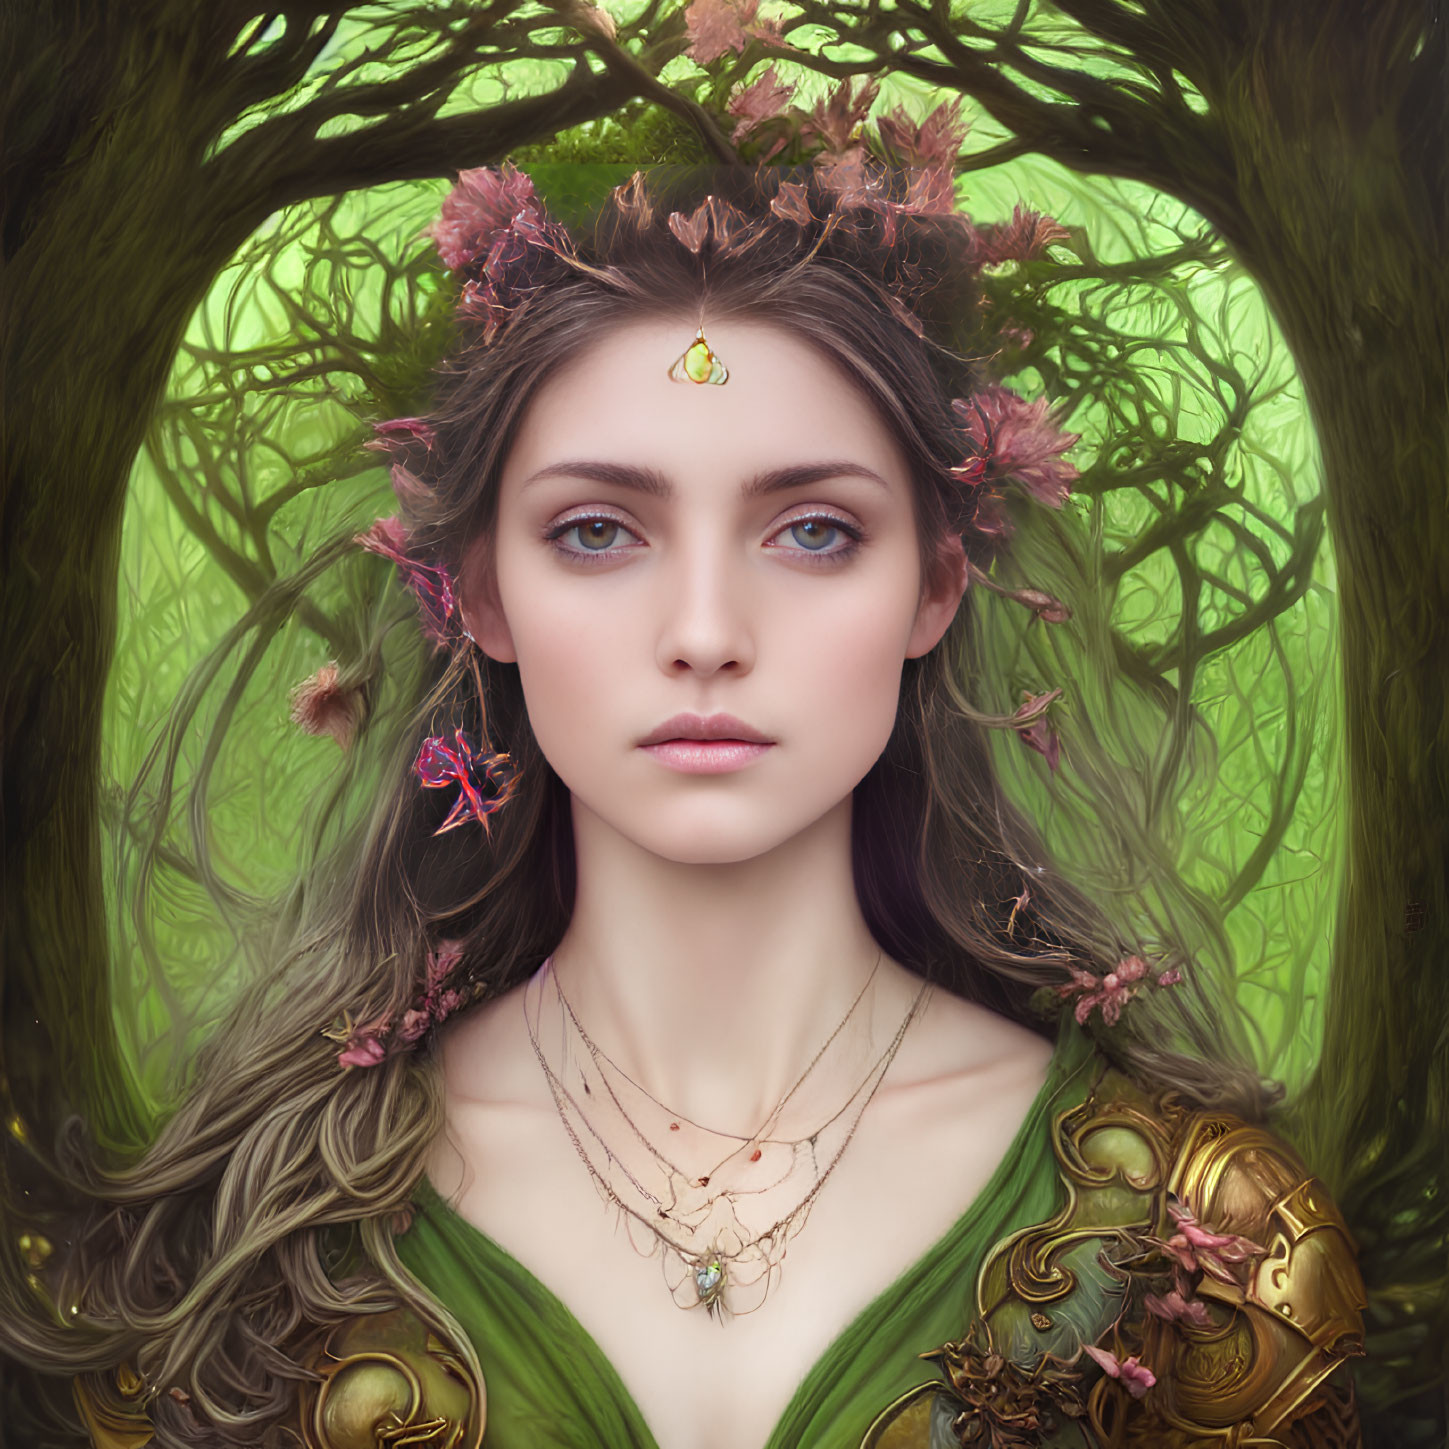 Mystical woman in floral crown and ornate armor with green dress and golden pendant